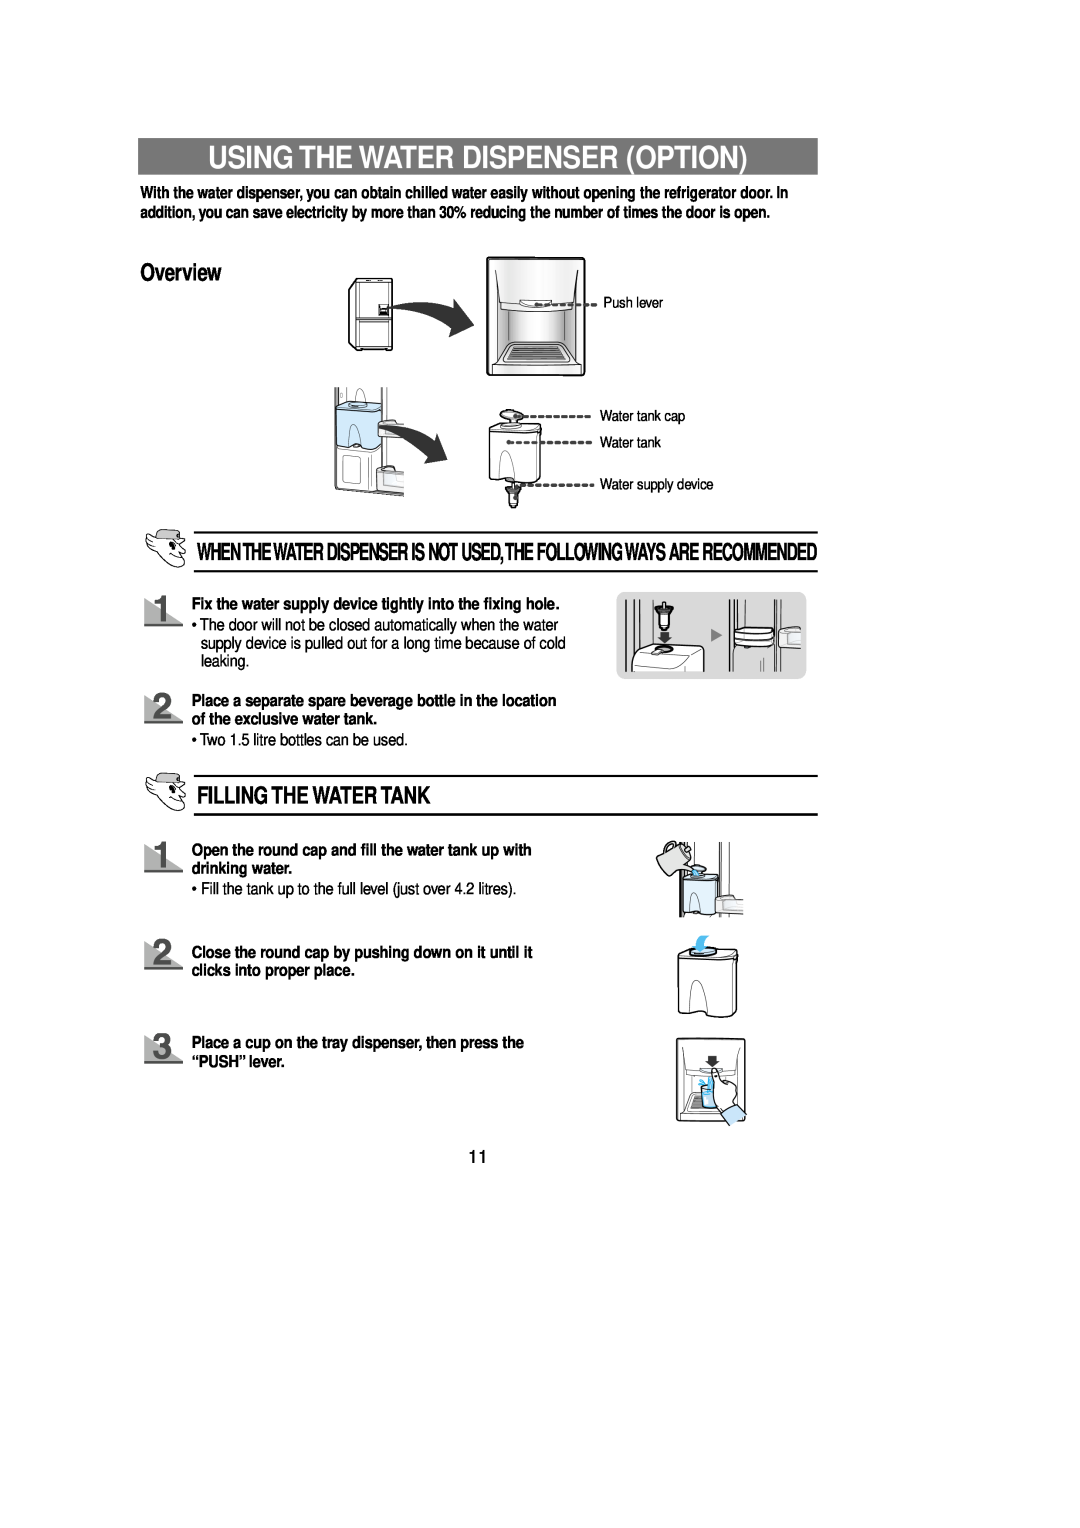 Samsung Rl 39 manual Using The Water Dispenser Option, Overview, Filling The Water Tank 